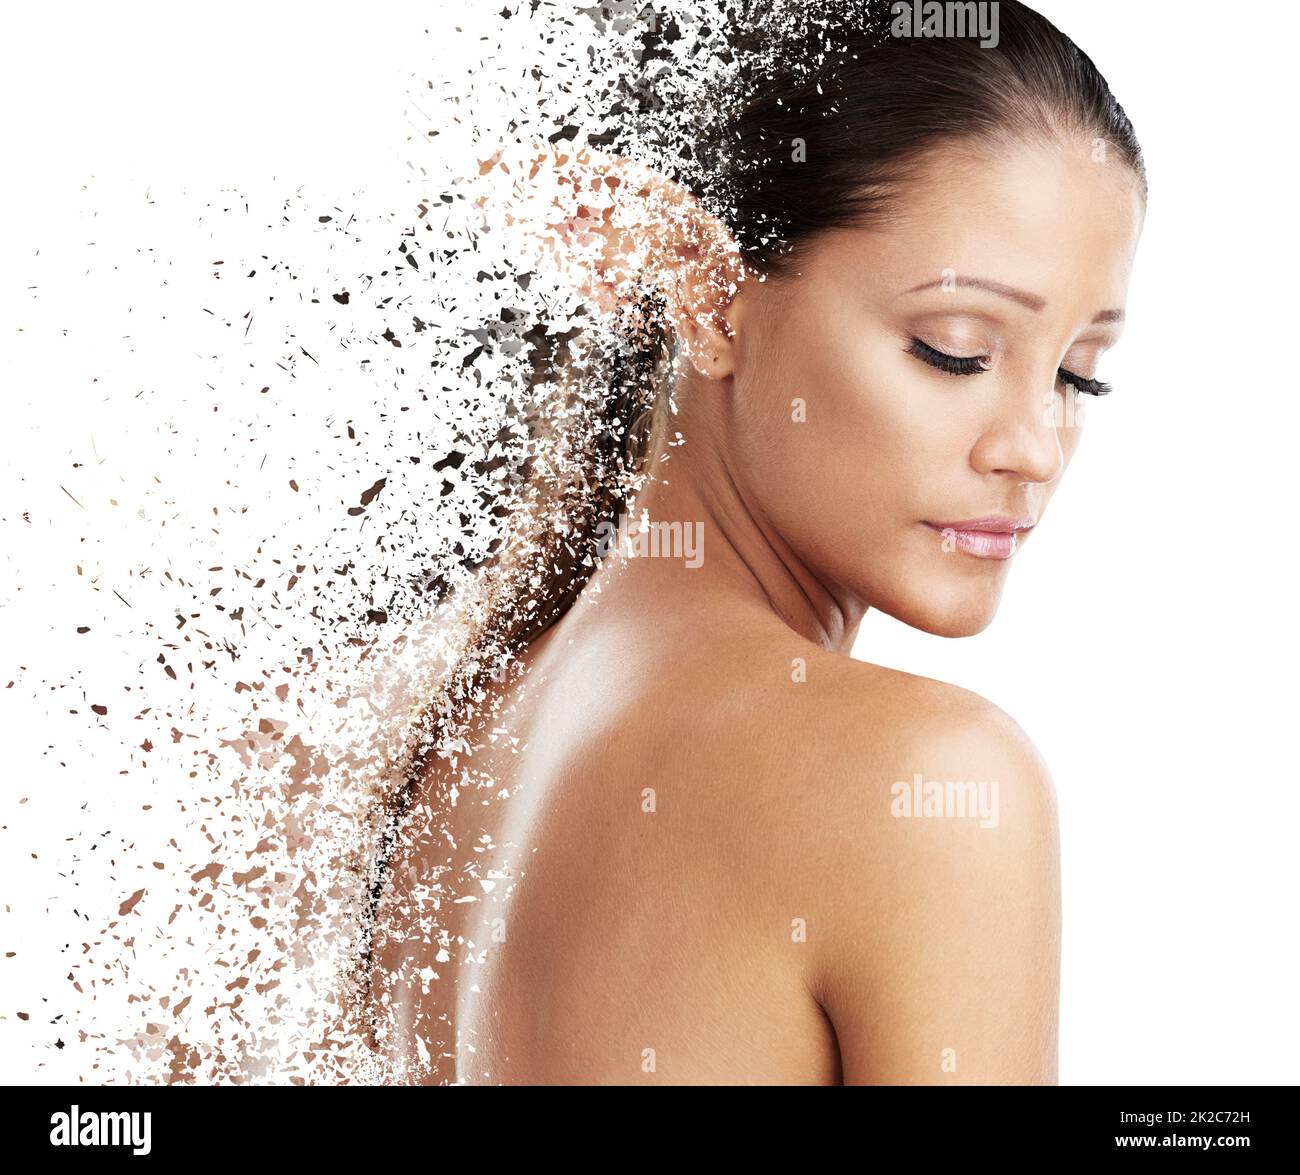 Effervescent adolescent. Enhanced studio shot of a young woman with beautiful skin. Stock Photo